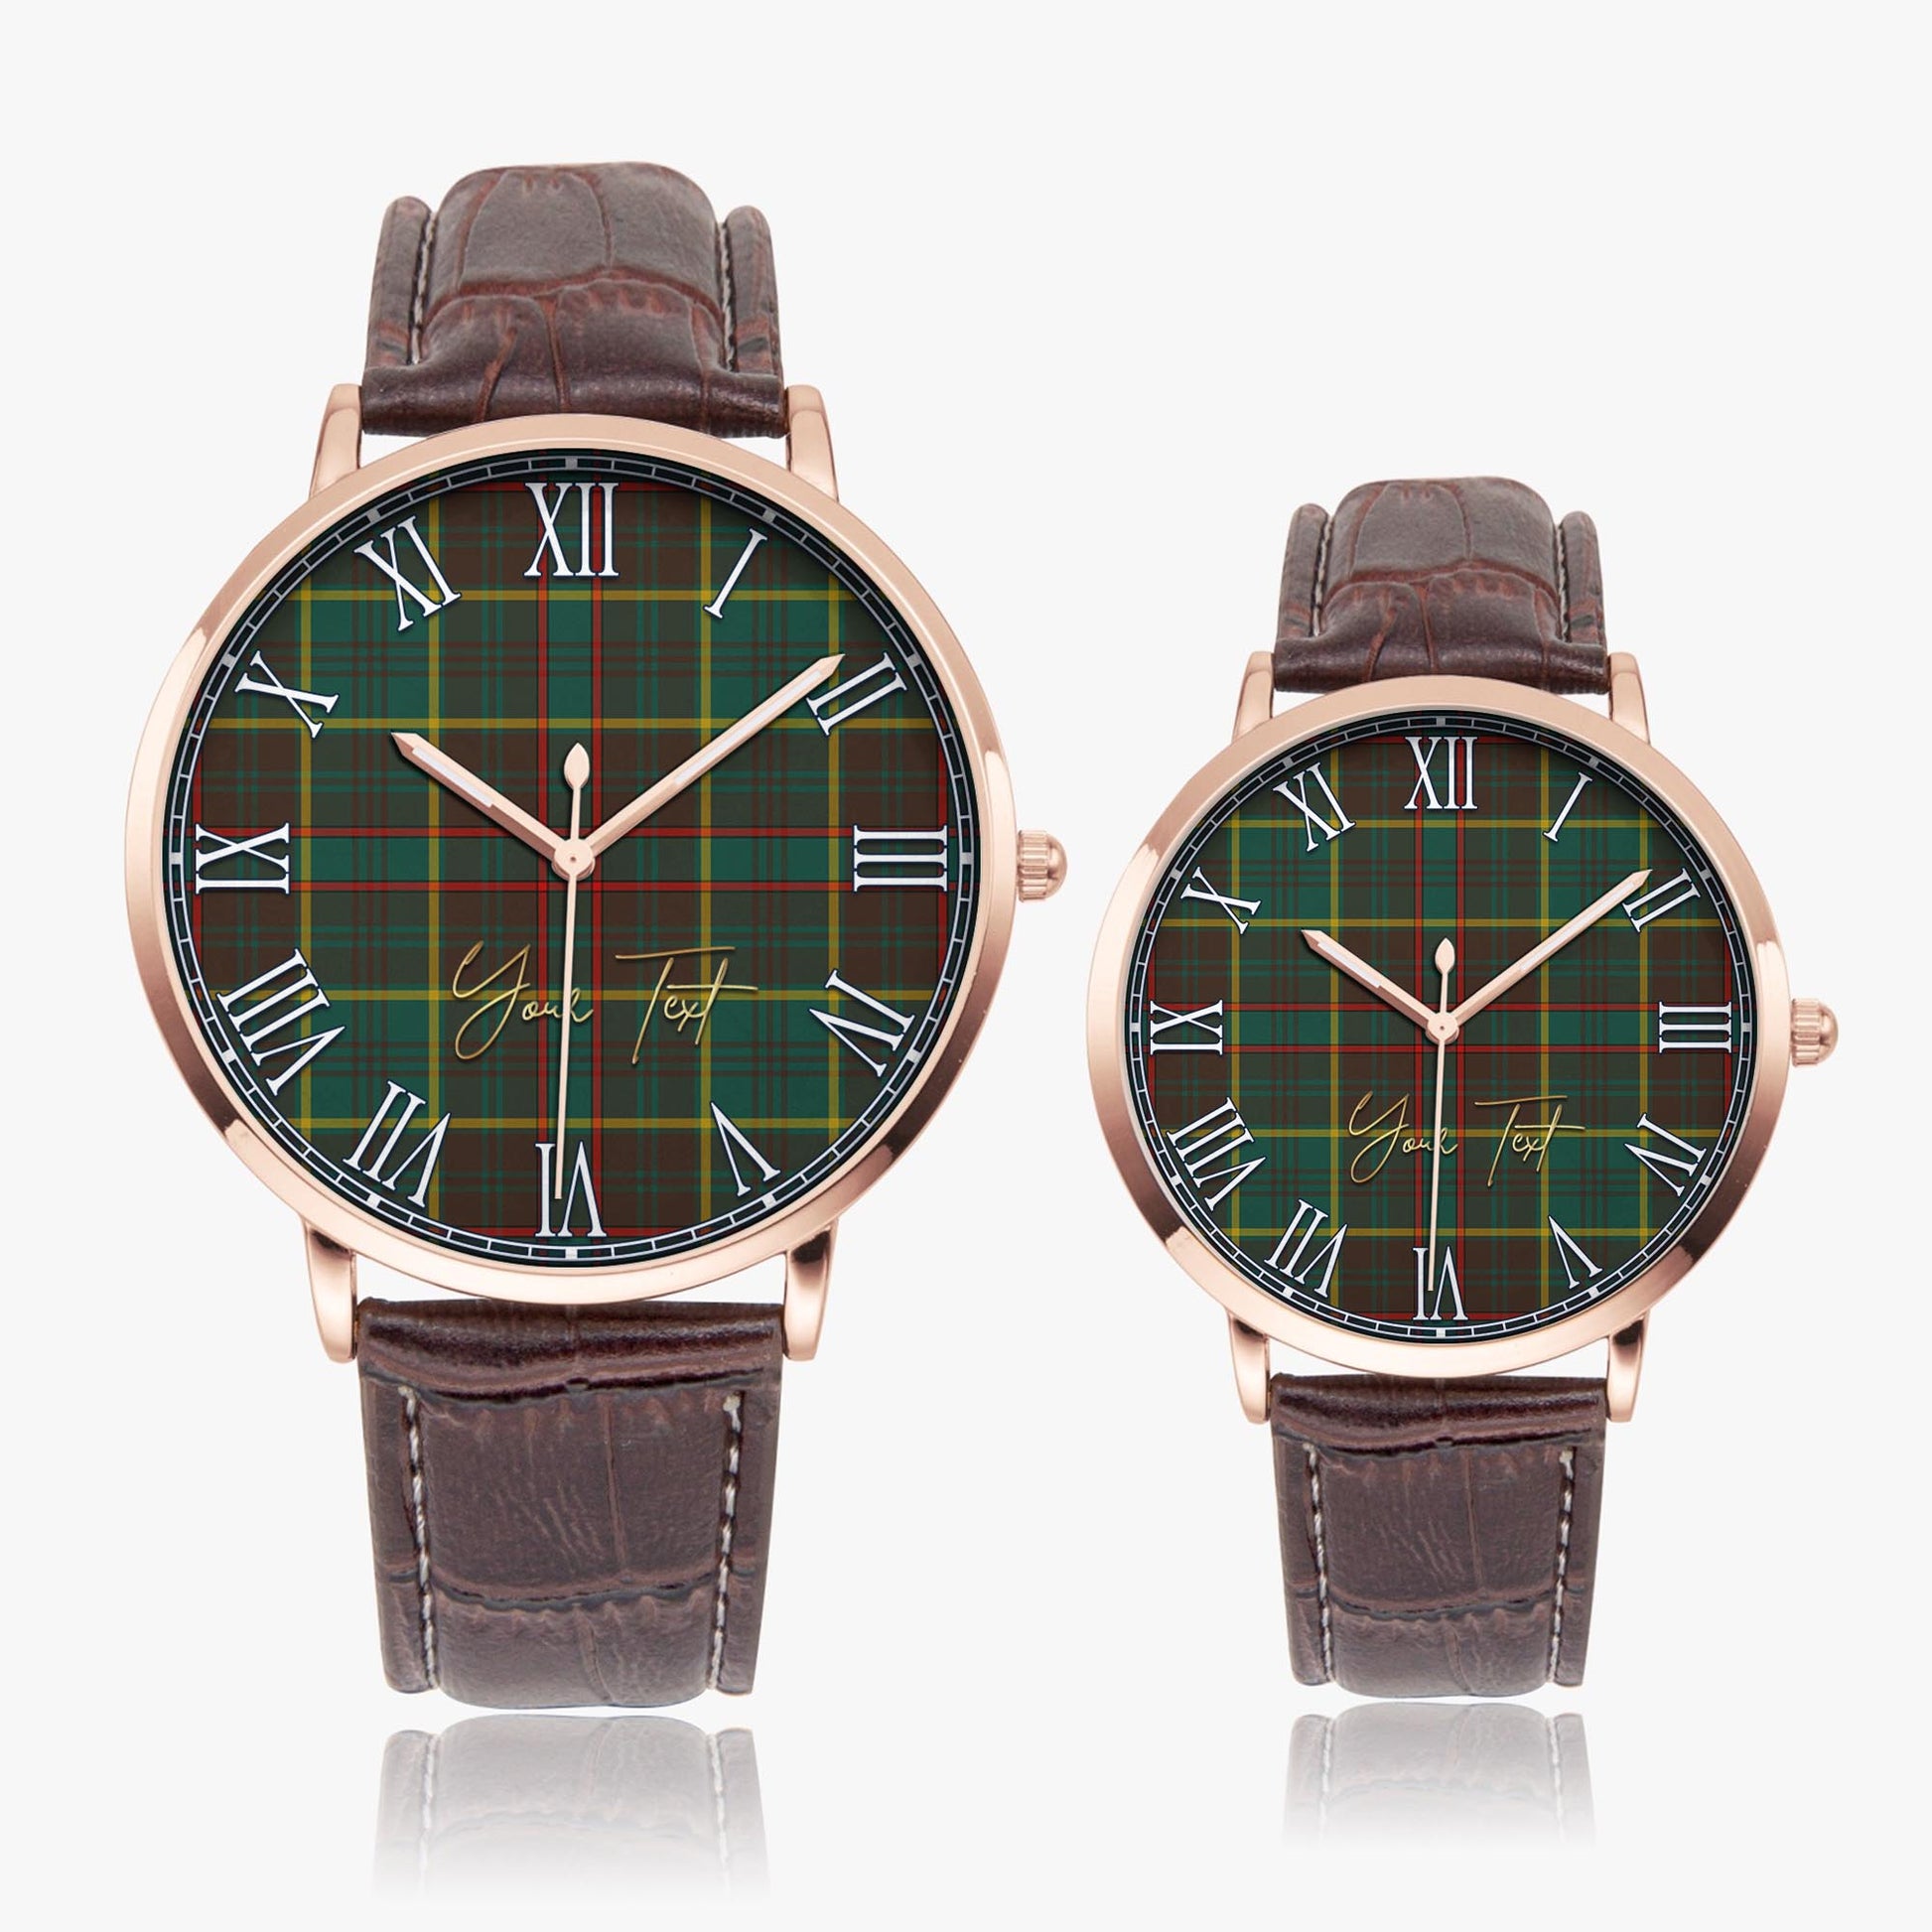 Ontario Province Canada Tartan Personalized Your Text Leather Trap Quartz Watch Ultra Thin Rose Gold Case With Brown Leather Strap - Tartanvibesclothing